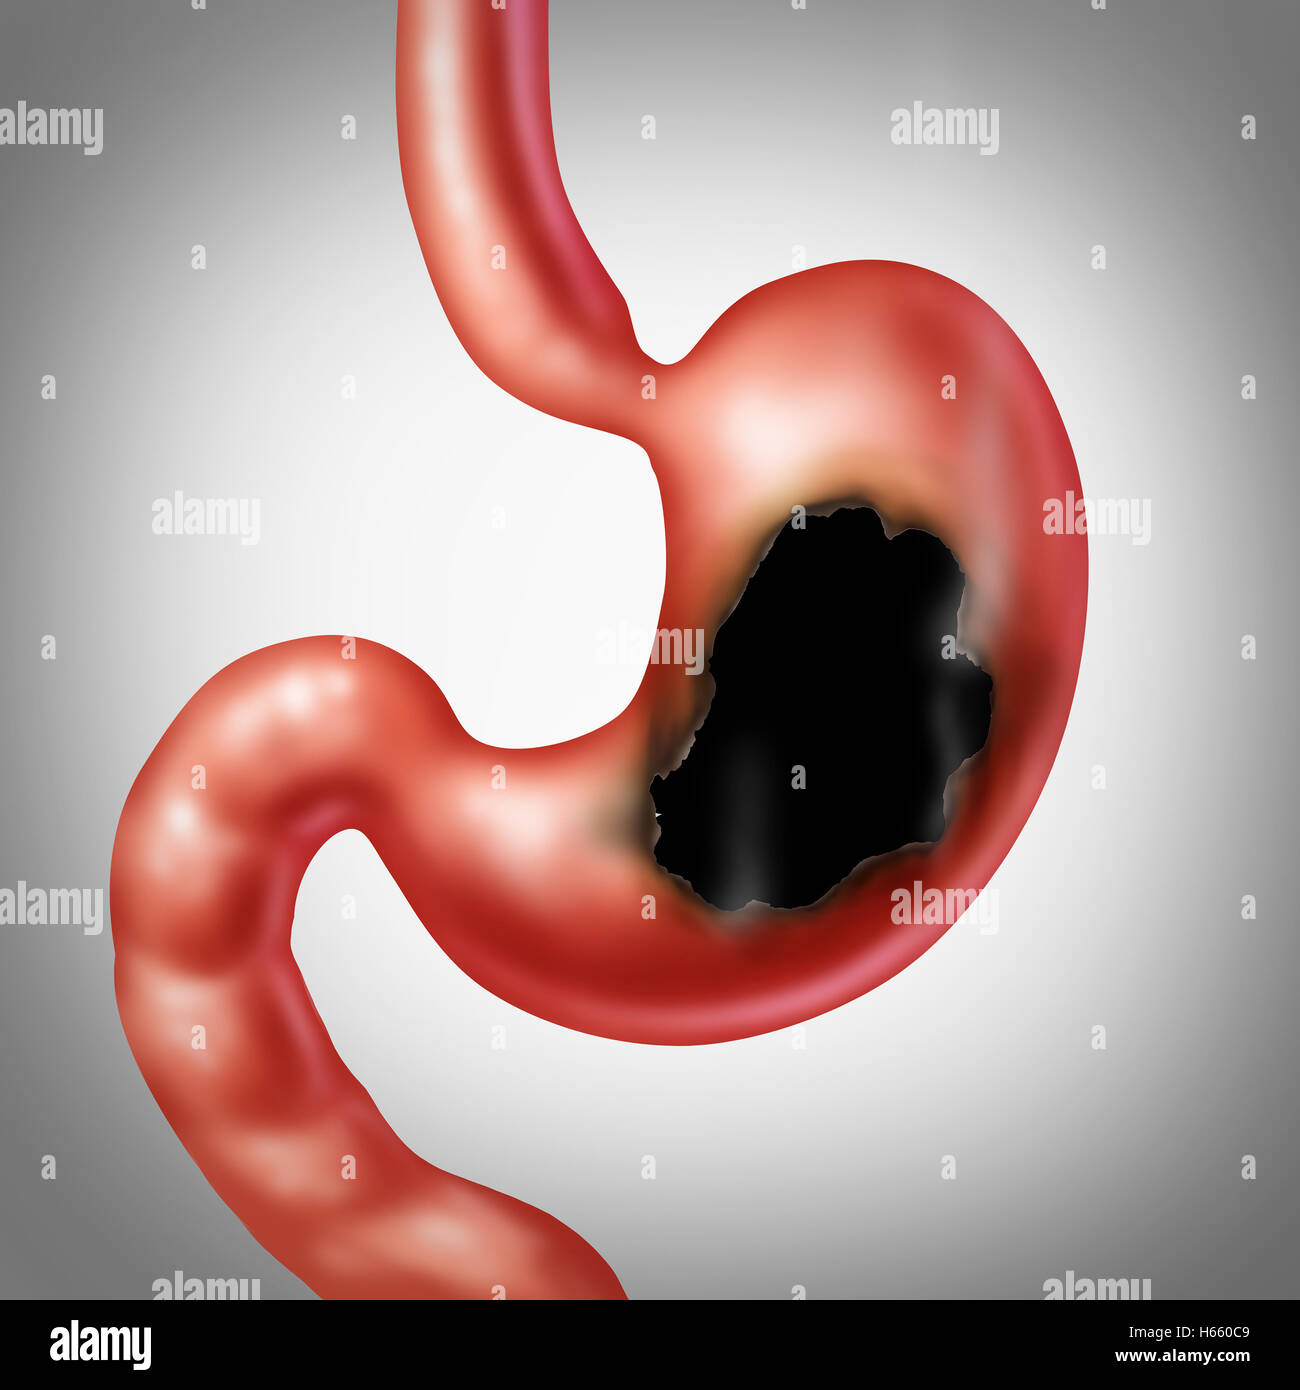 Stomach ulcer medical concept and burning indigestion pain in the digestive system with a medical illustration of the human abdomen organ with a hole and a burn with smoke as a health care symbol in a 3D illustration style. Stock Photo